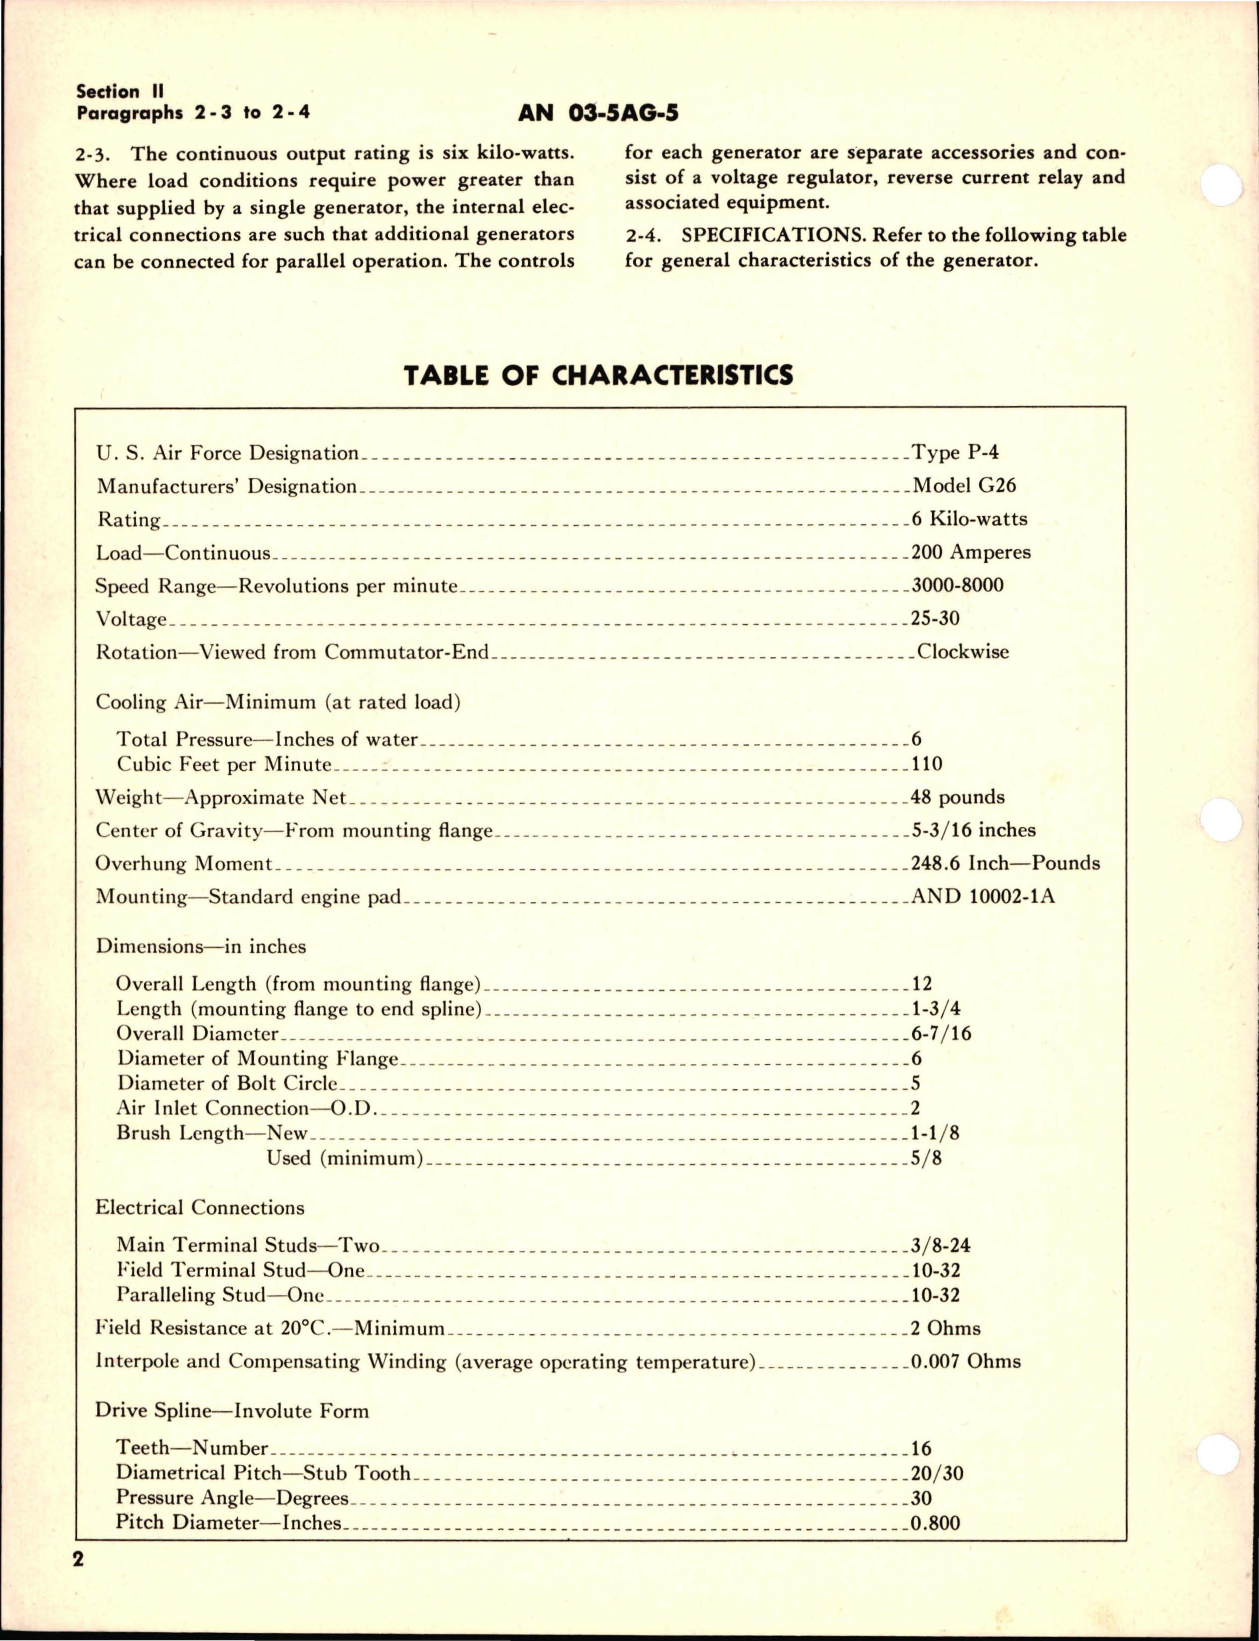 Sample page 7 from AirCorps Library document: Instructions with Parts Catalog for Generator - Model G26